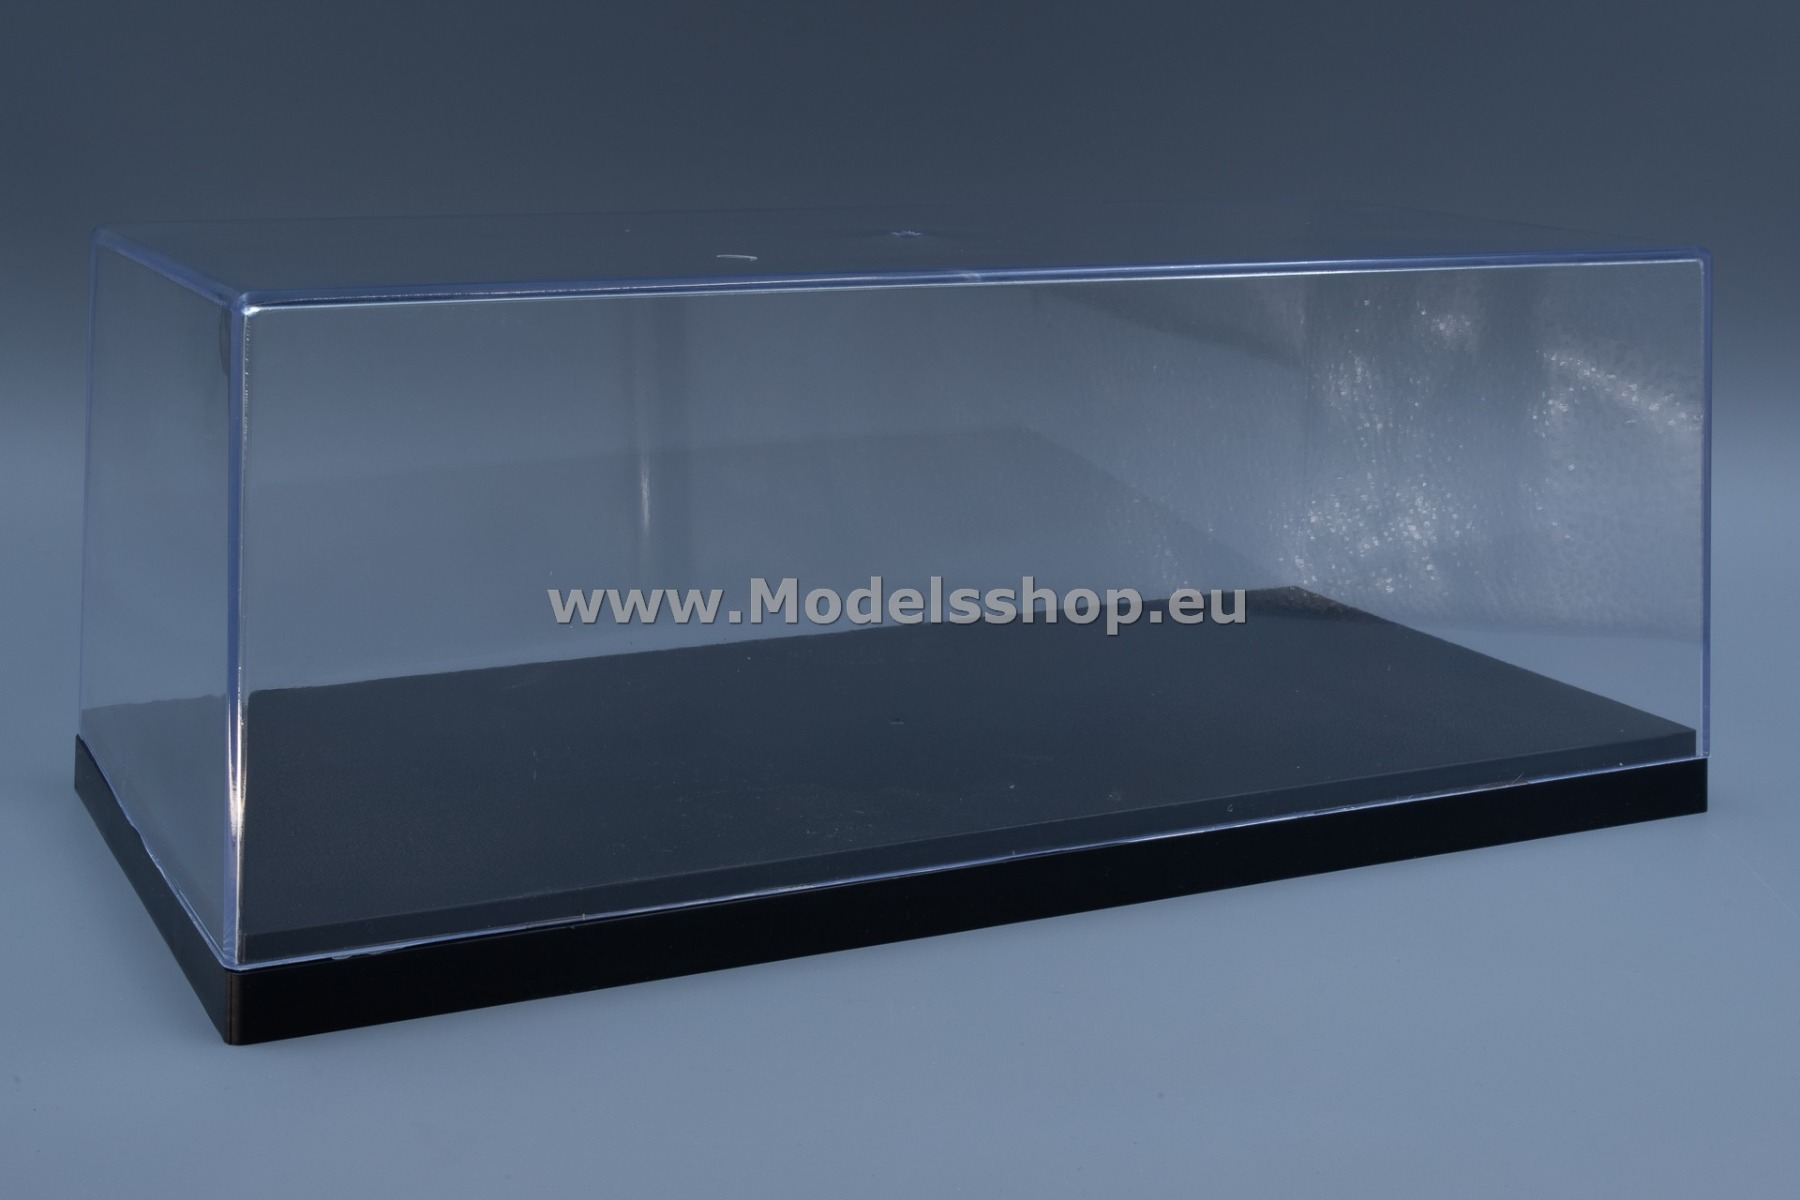 Show case for 1:18, actual size: 34cm x 16cm x 11cm (model not included!)